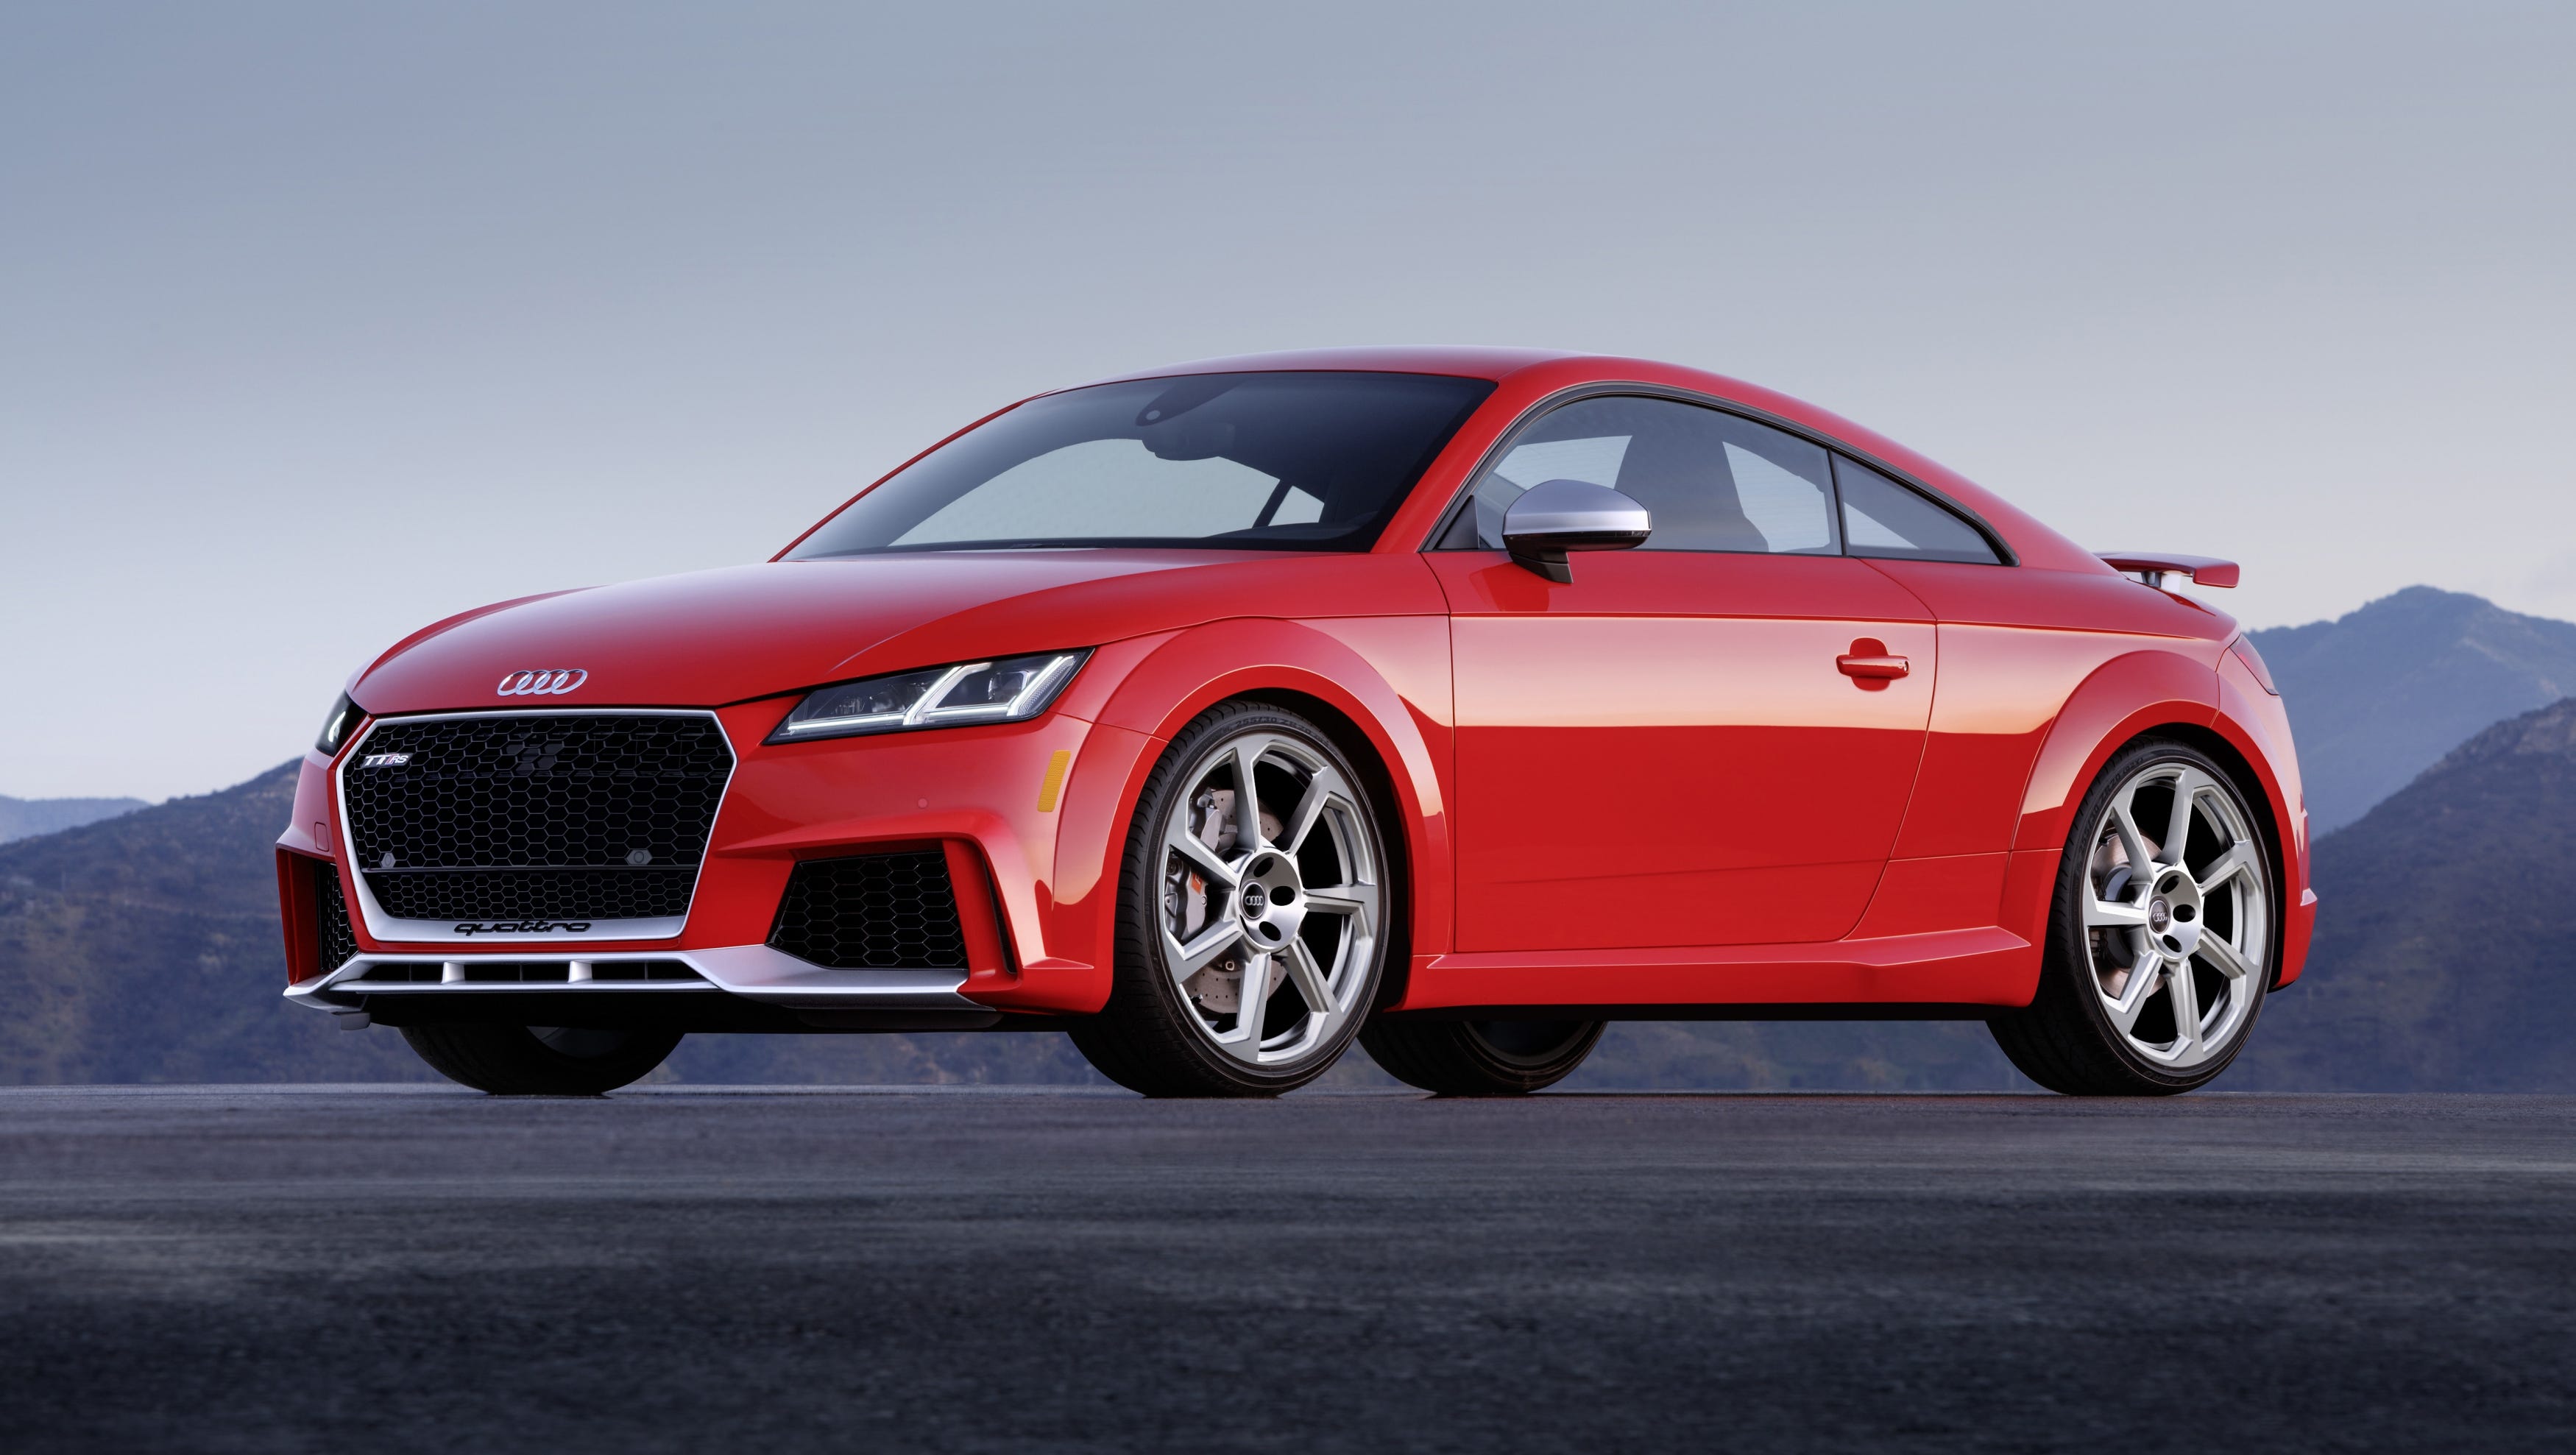 2018 Audi TT RS sports coupe